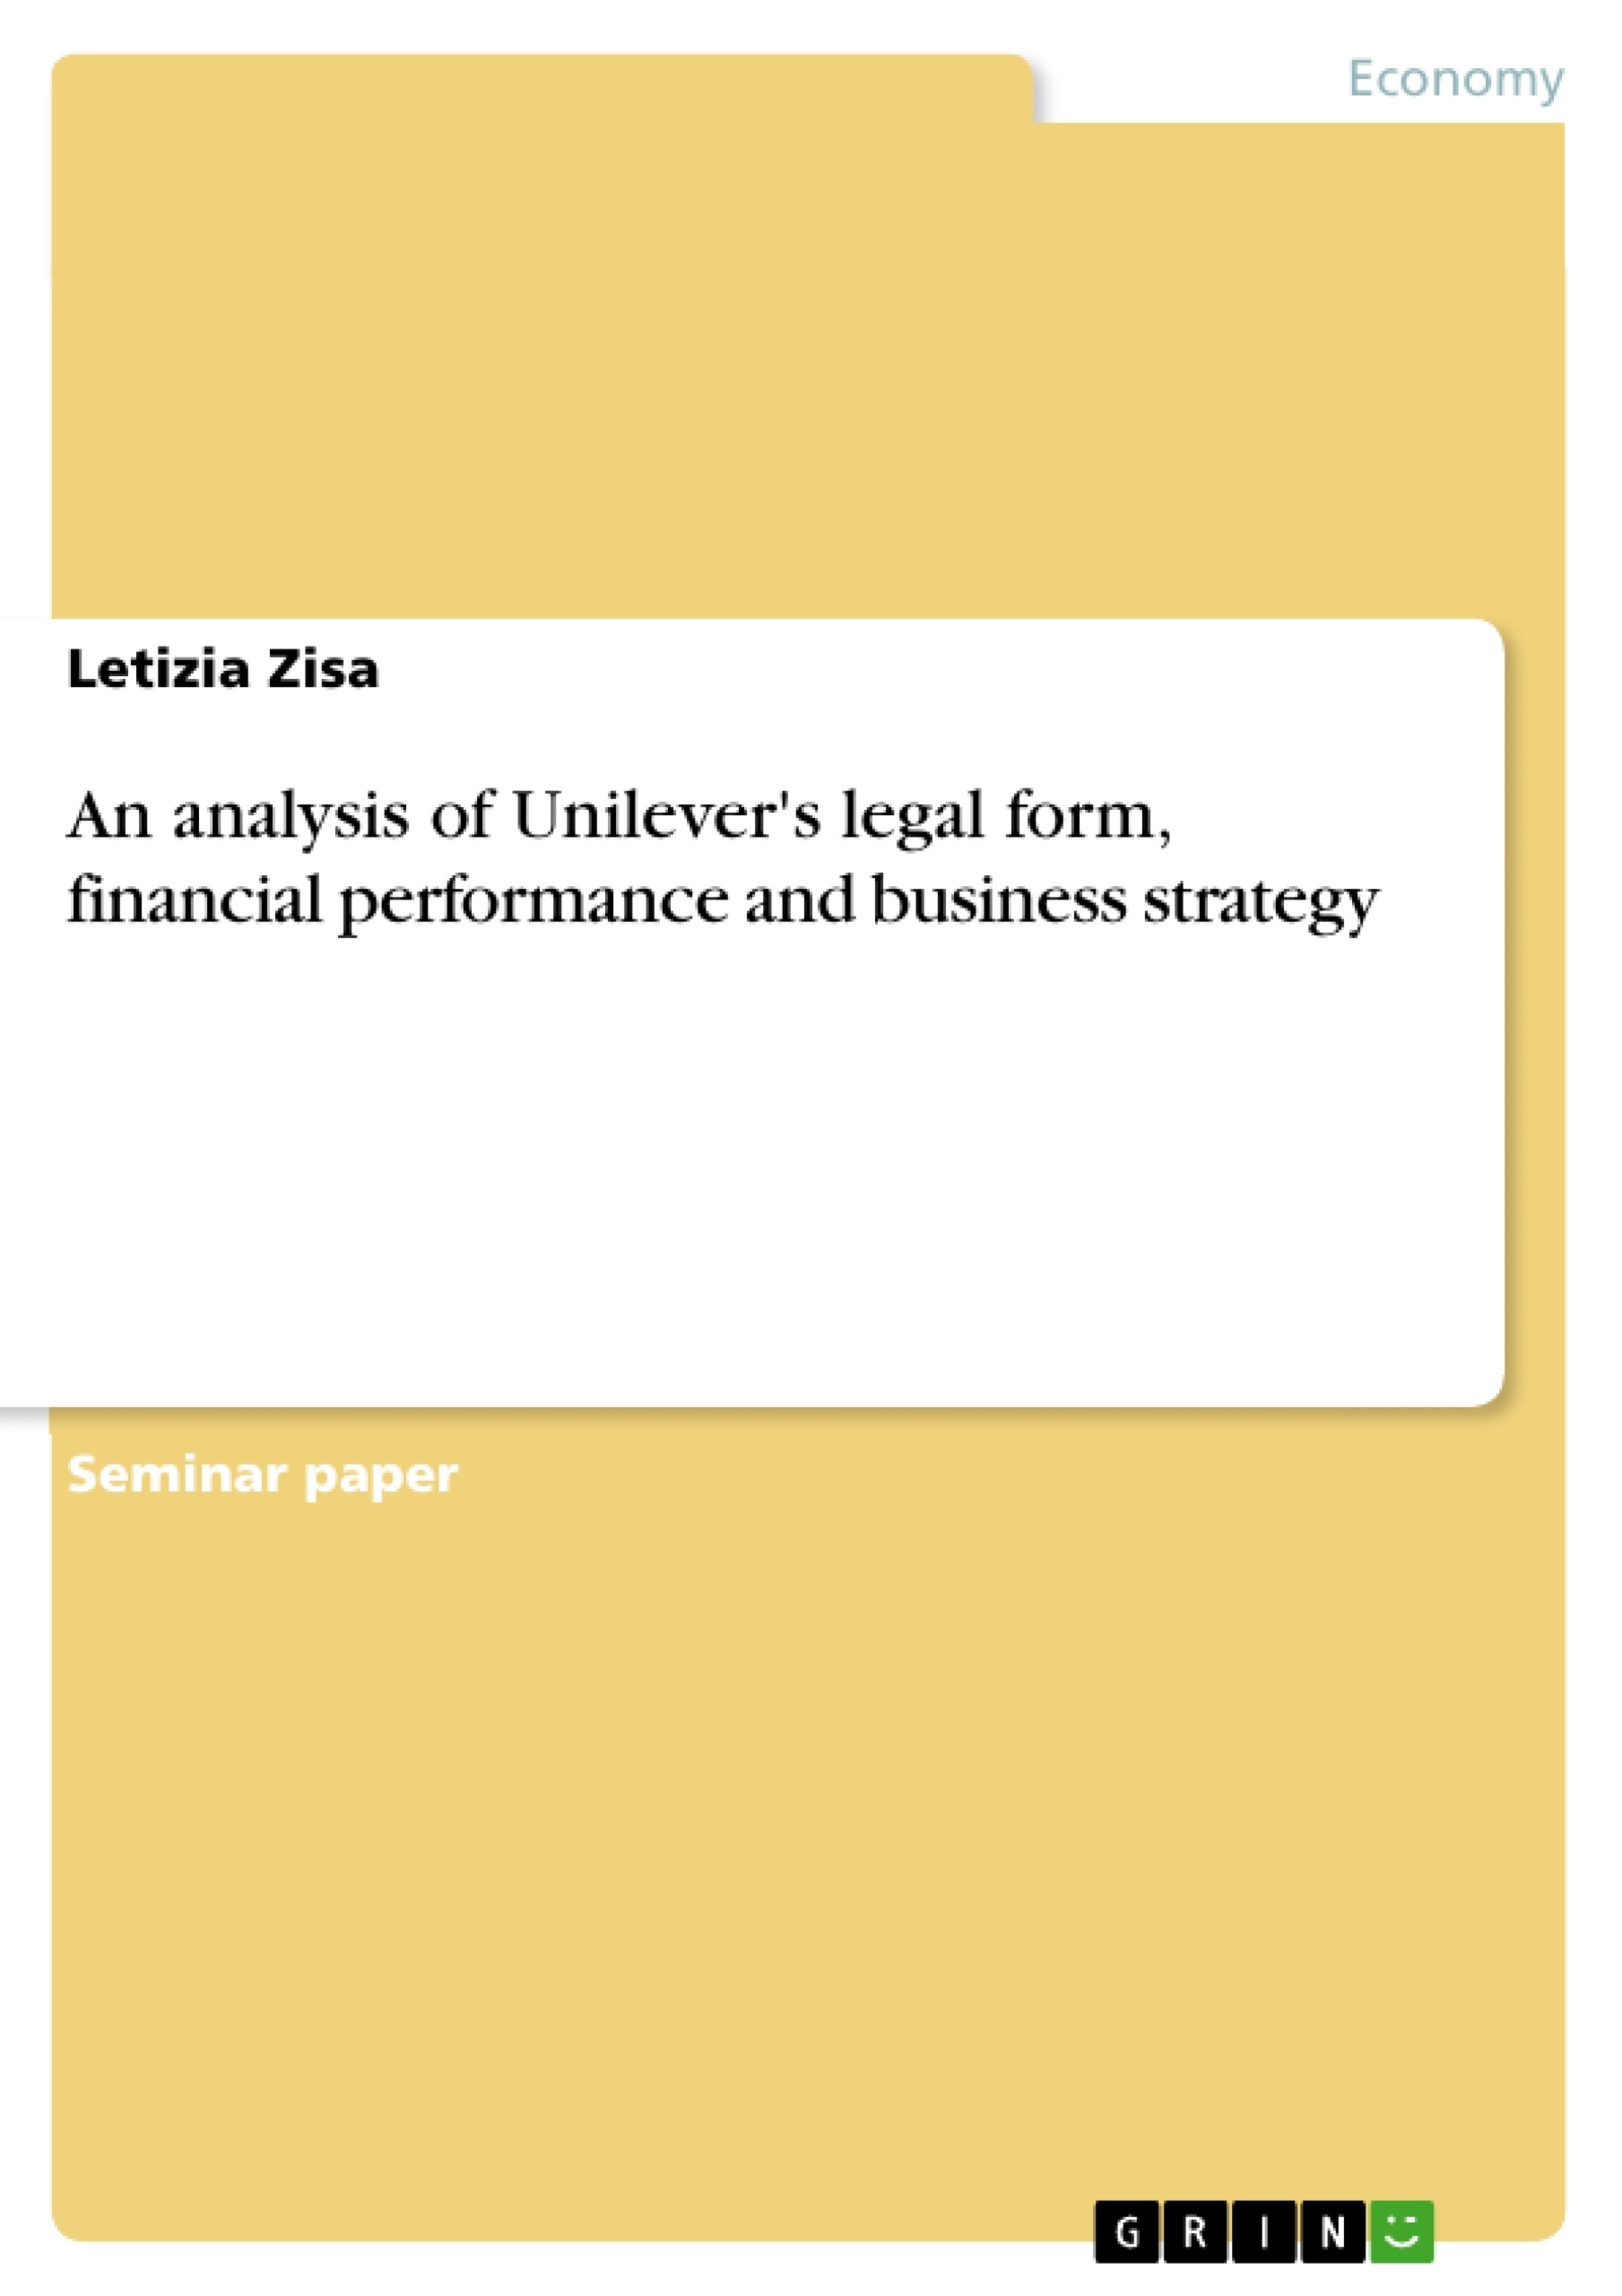 Titre: An analysis of Unilever's legal form, financial performance and business strategy